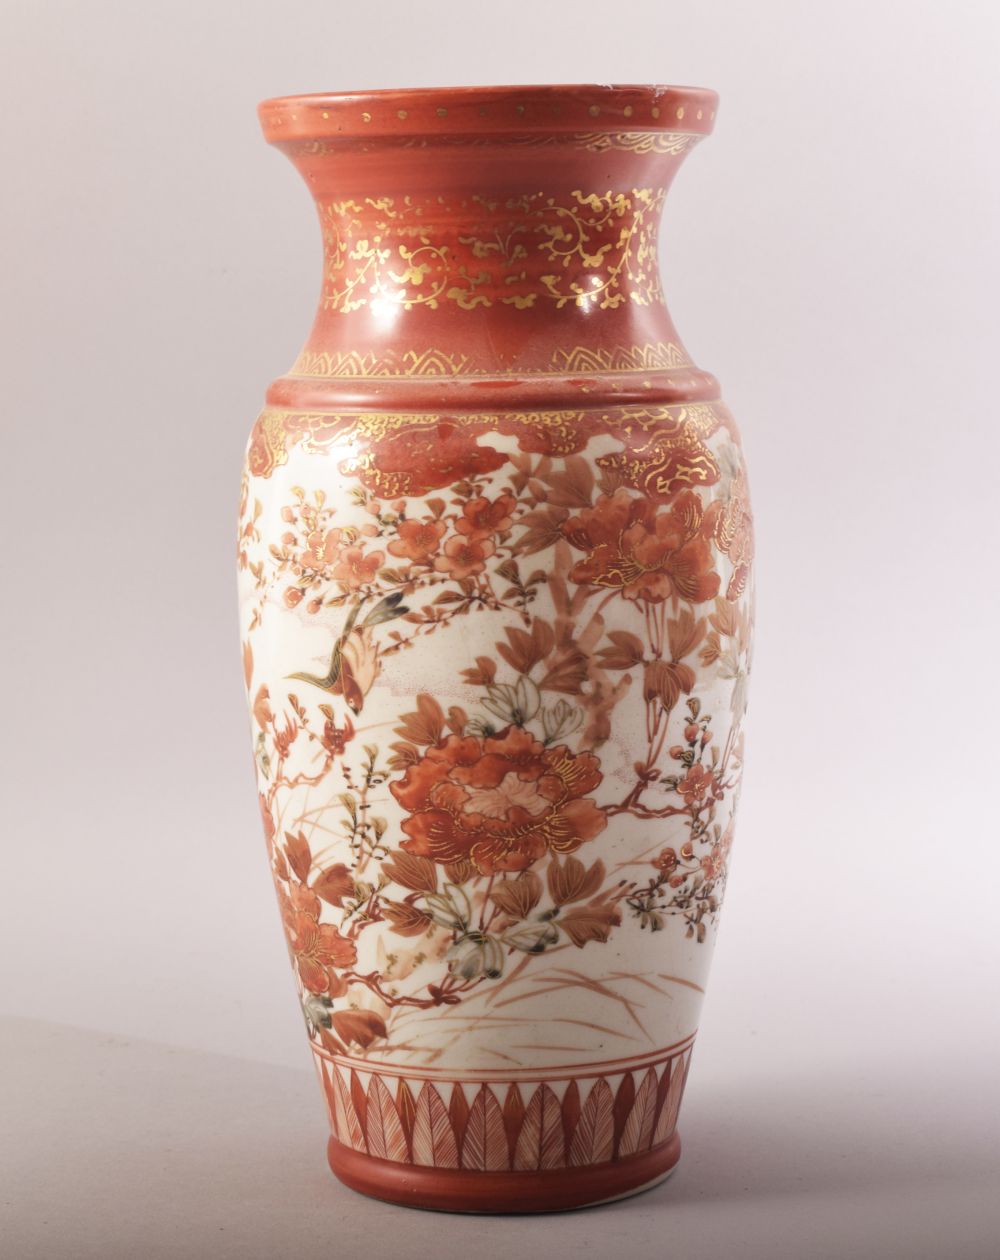 A JAPANESE KUTANI PORCELAIN VASE, painted with birds, native flora and gilt highlights, 30.5cm